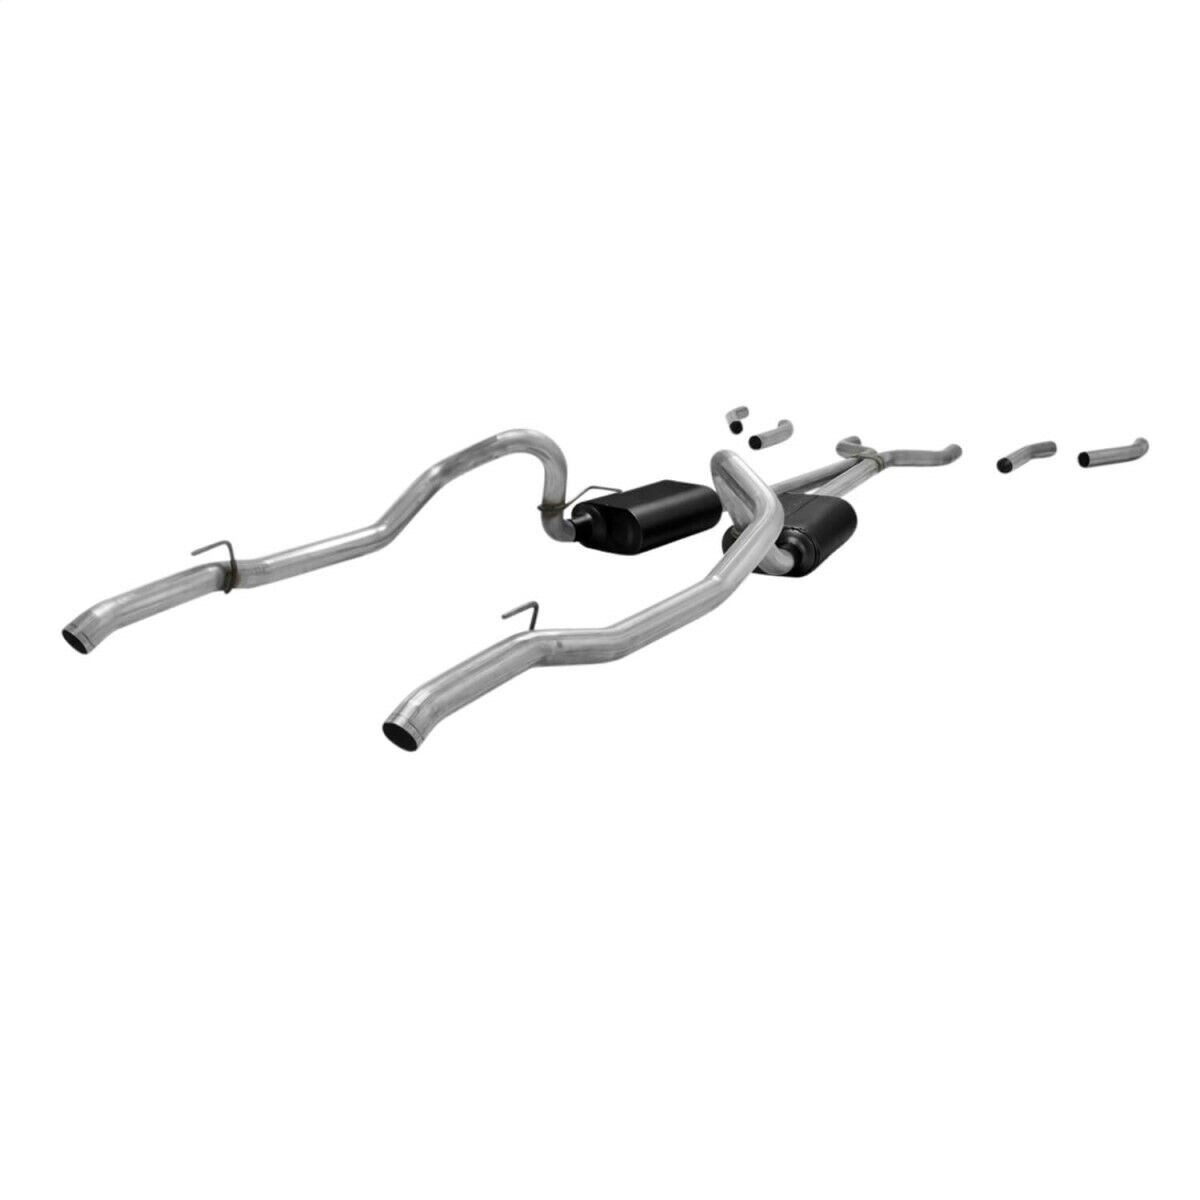 817585 Flowmaster Exhaust System for Dodge Dart Plymouth Valiant Scamp Duster